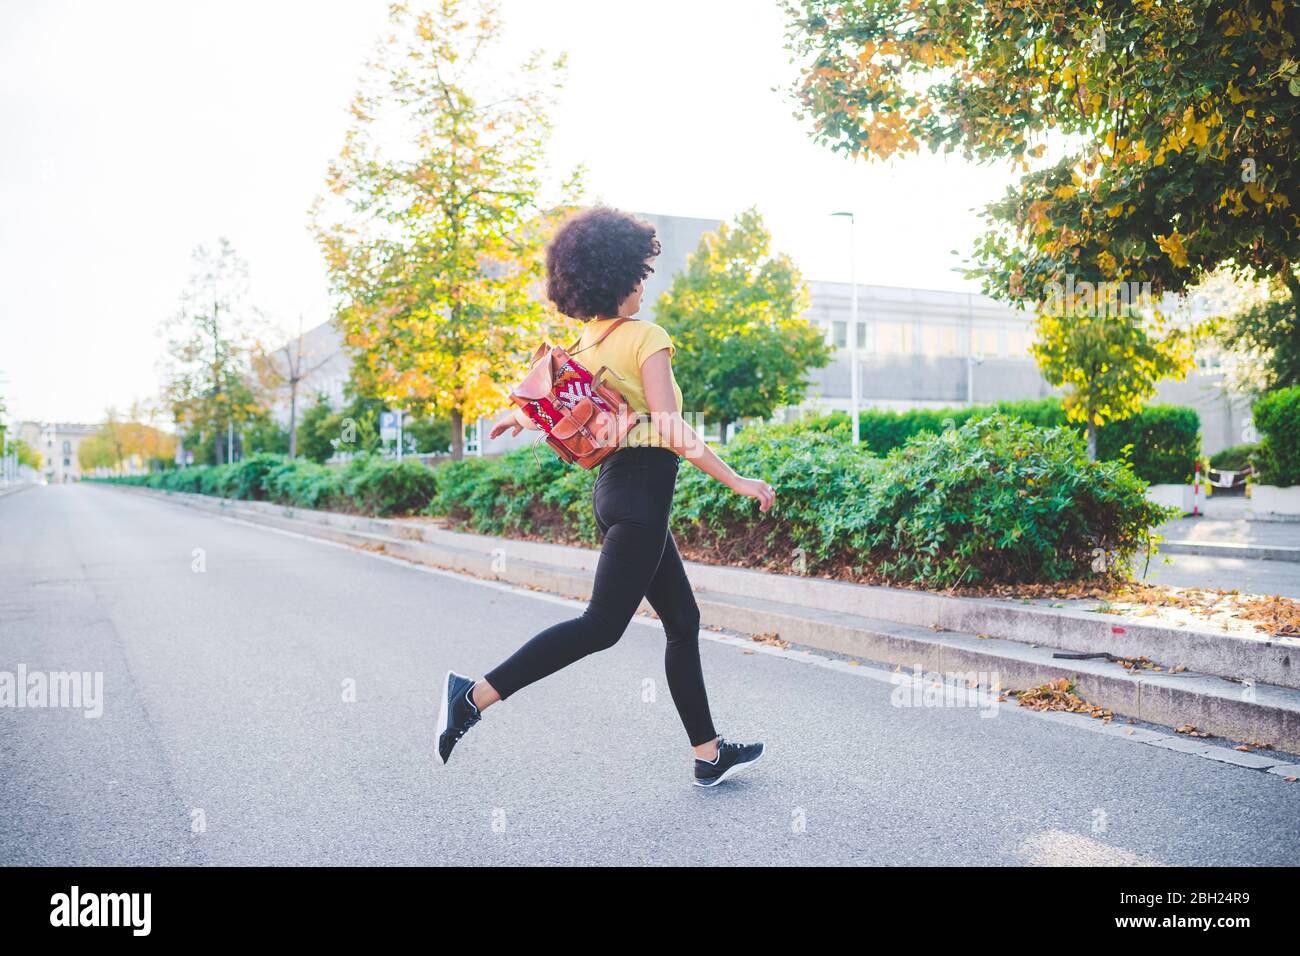 Young woman with afro hairdo running on a street in the city Stock Photo